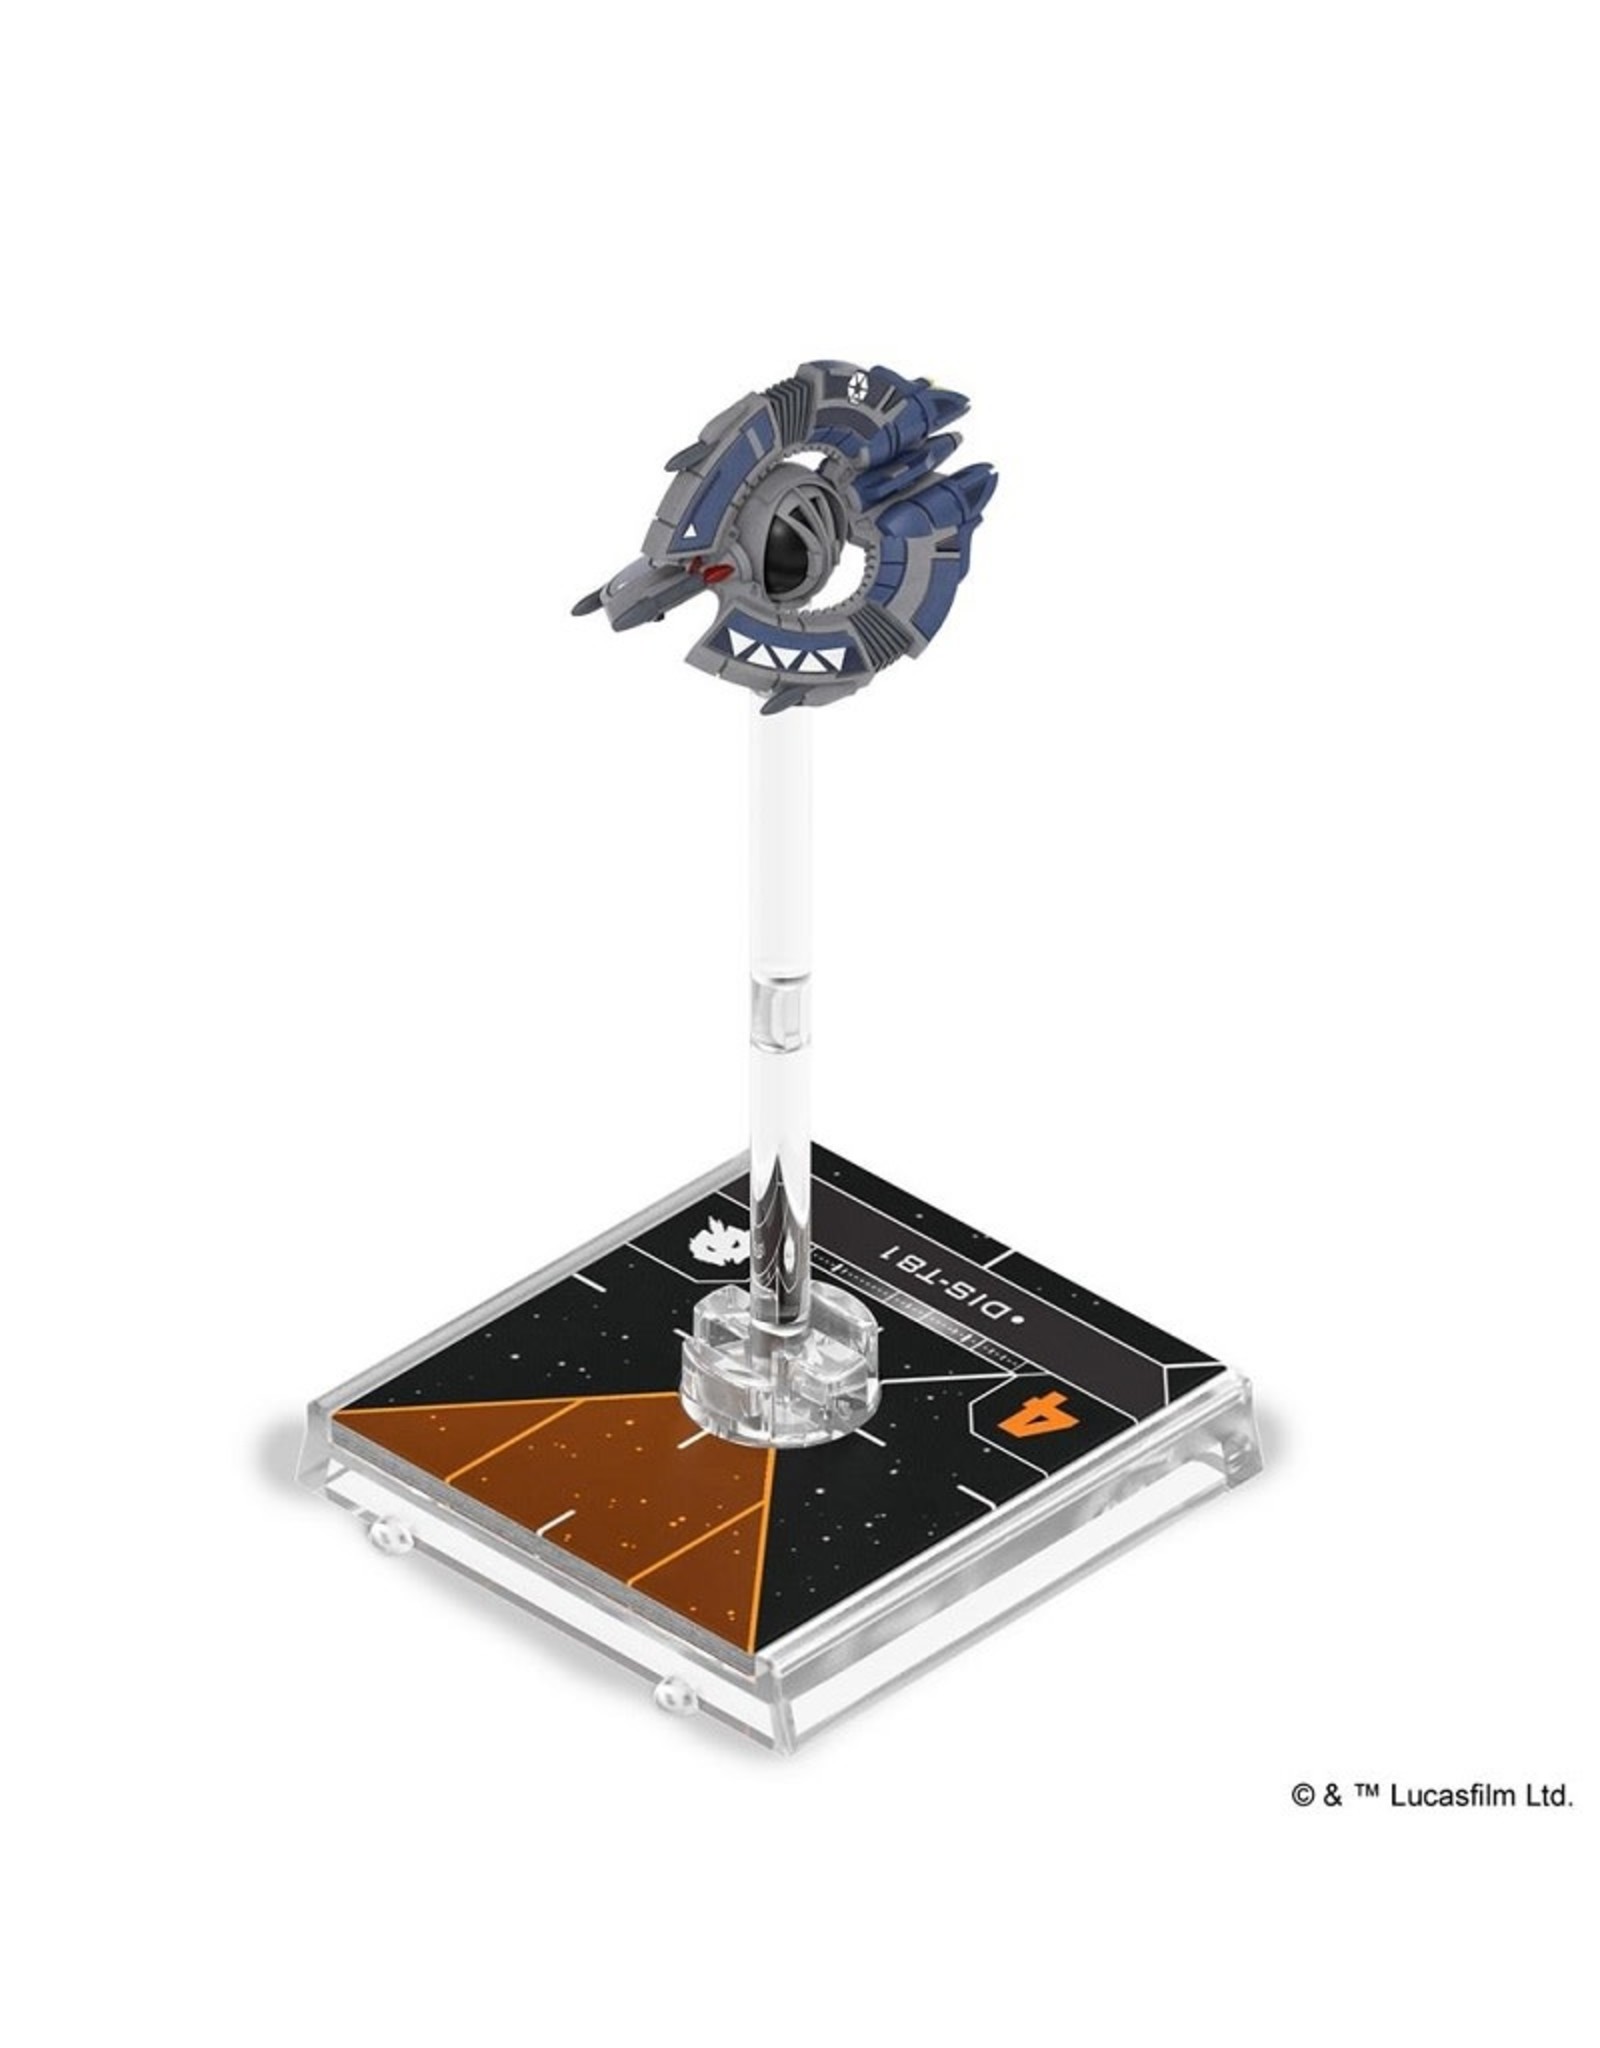 Atomic Mass Games Star Wars X-Wing: Droid Tri-Fighter - 2nd Edition